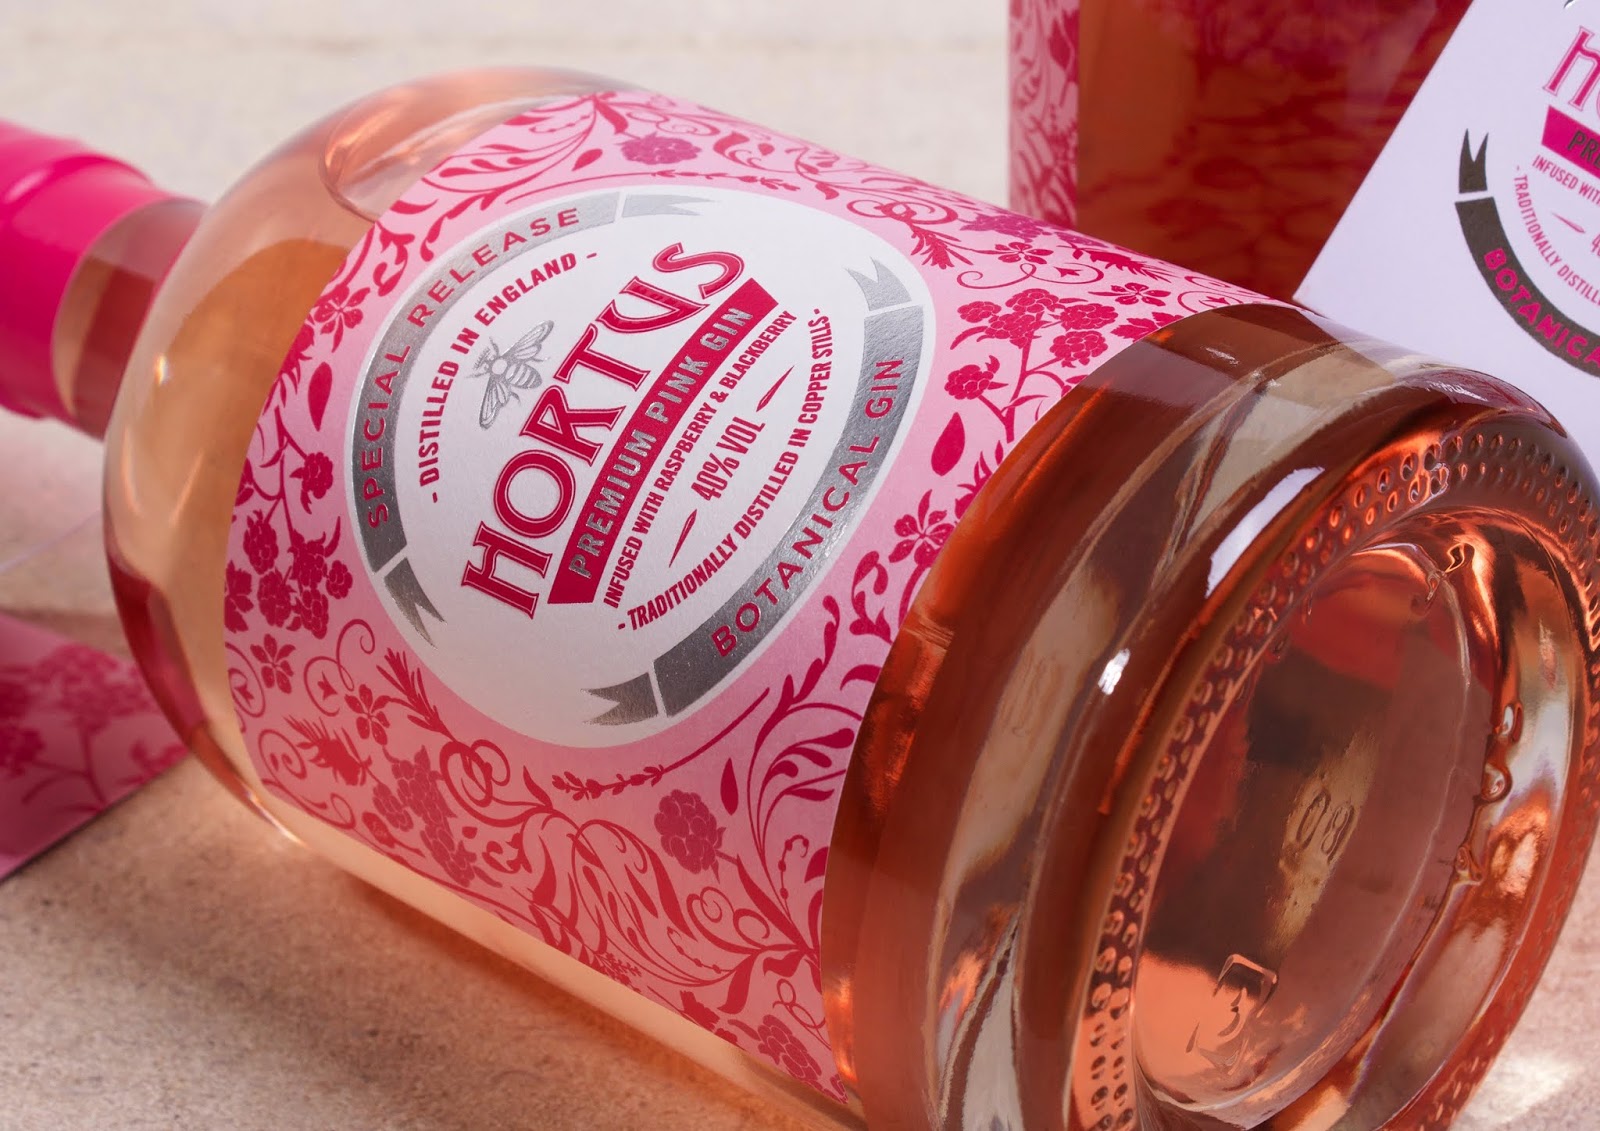 Hortus Premium Pink Gin – Packaging Of The World